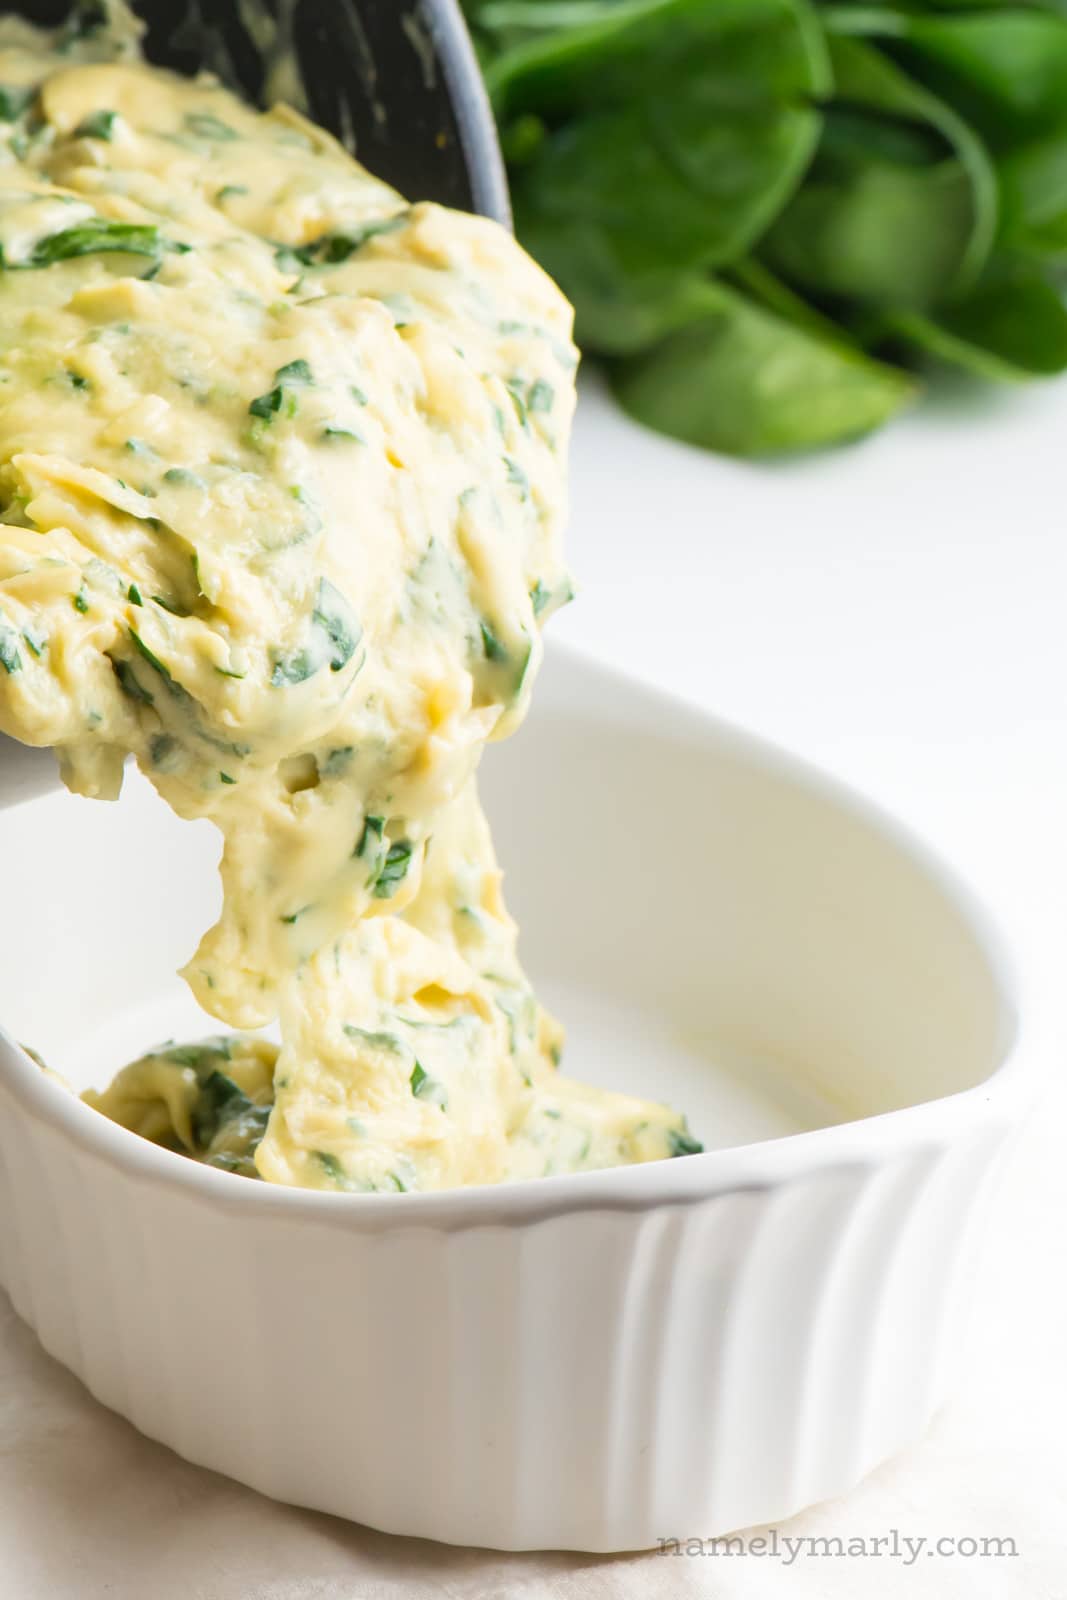 A creamy spinach sauce is being poured from the sauce pan into a serving dish.